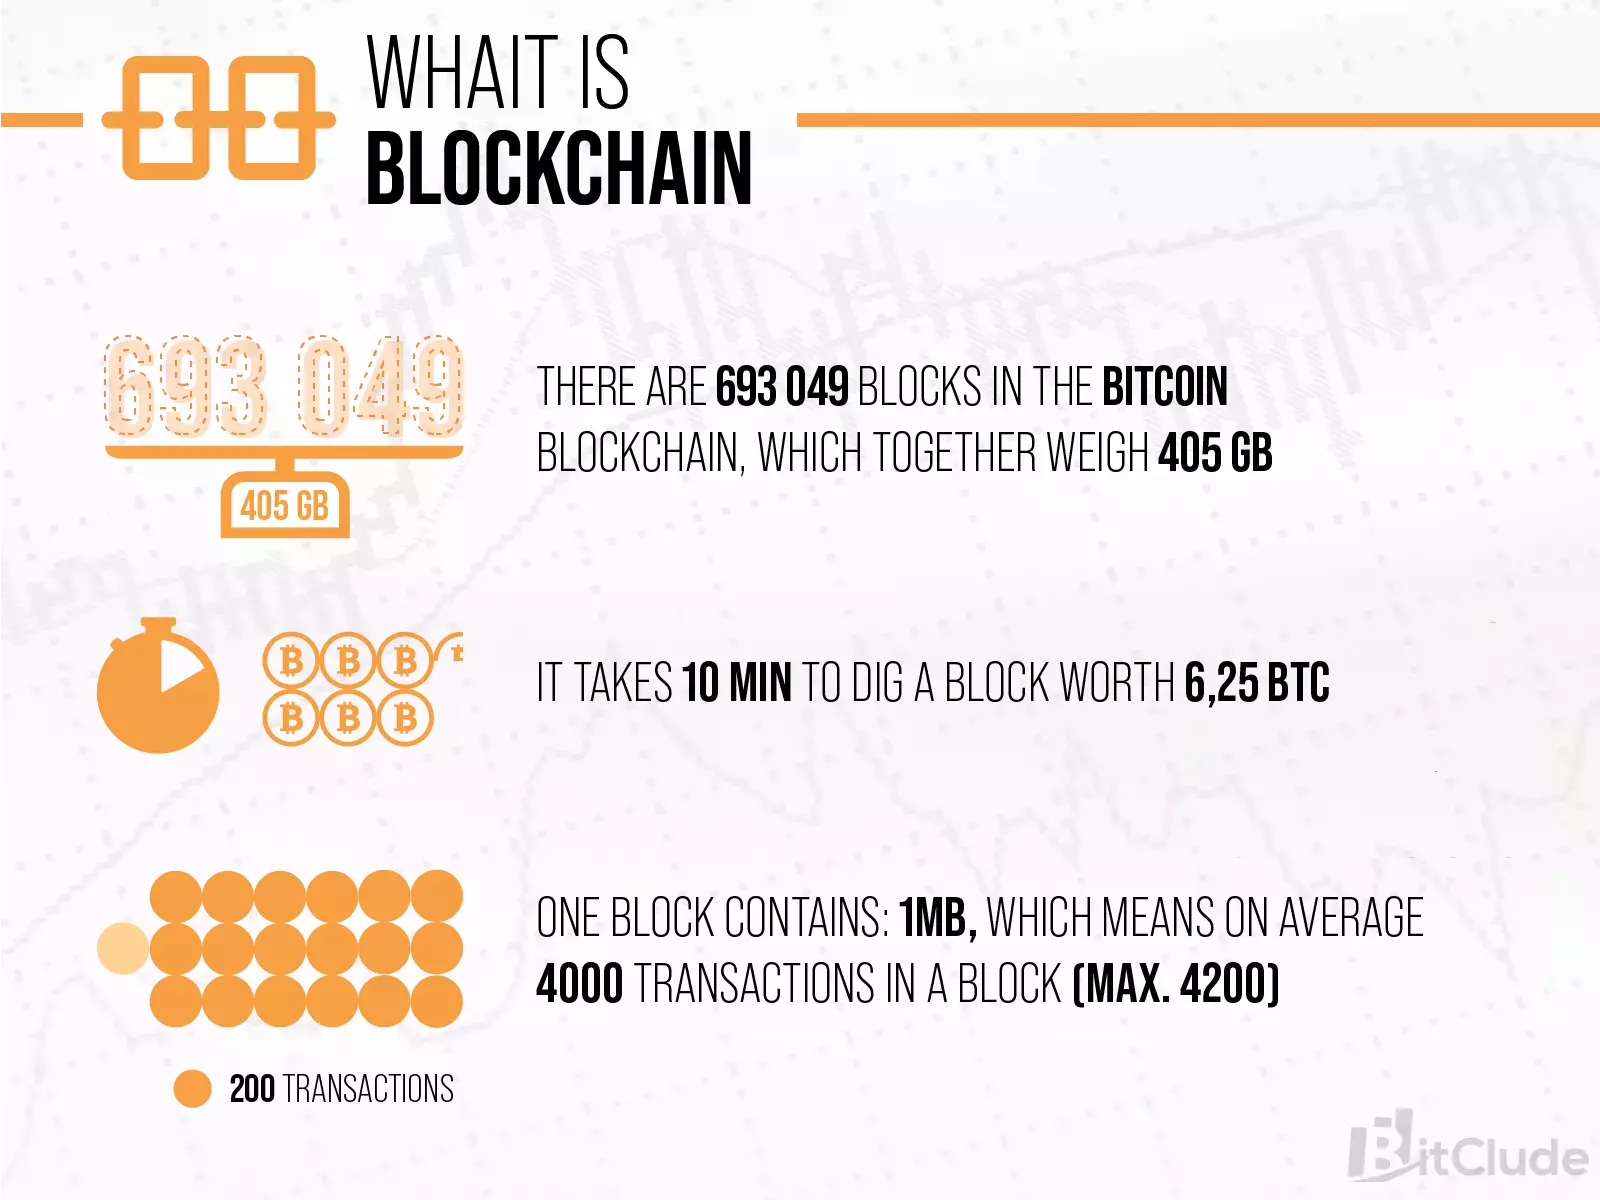 Blockchain is a network of connected blocks. 693,049 blocks that weigh around 450 GB have been created in the Bitcoin blockchain.